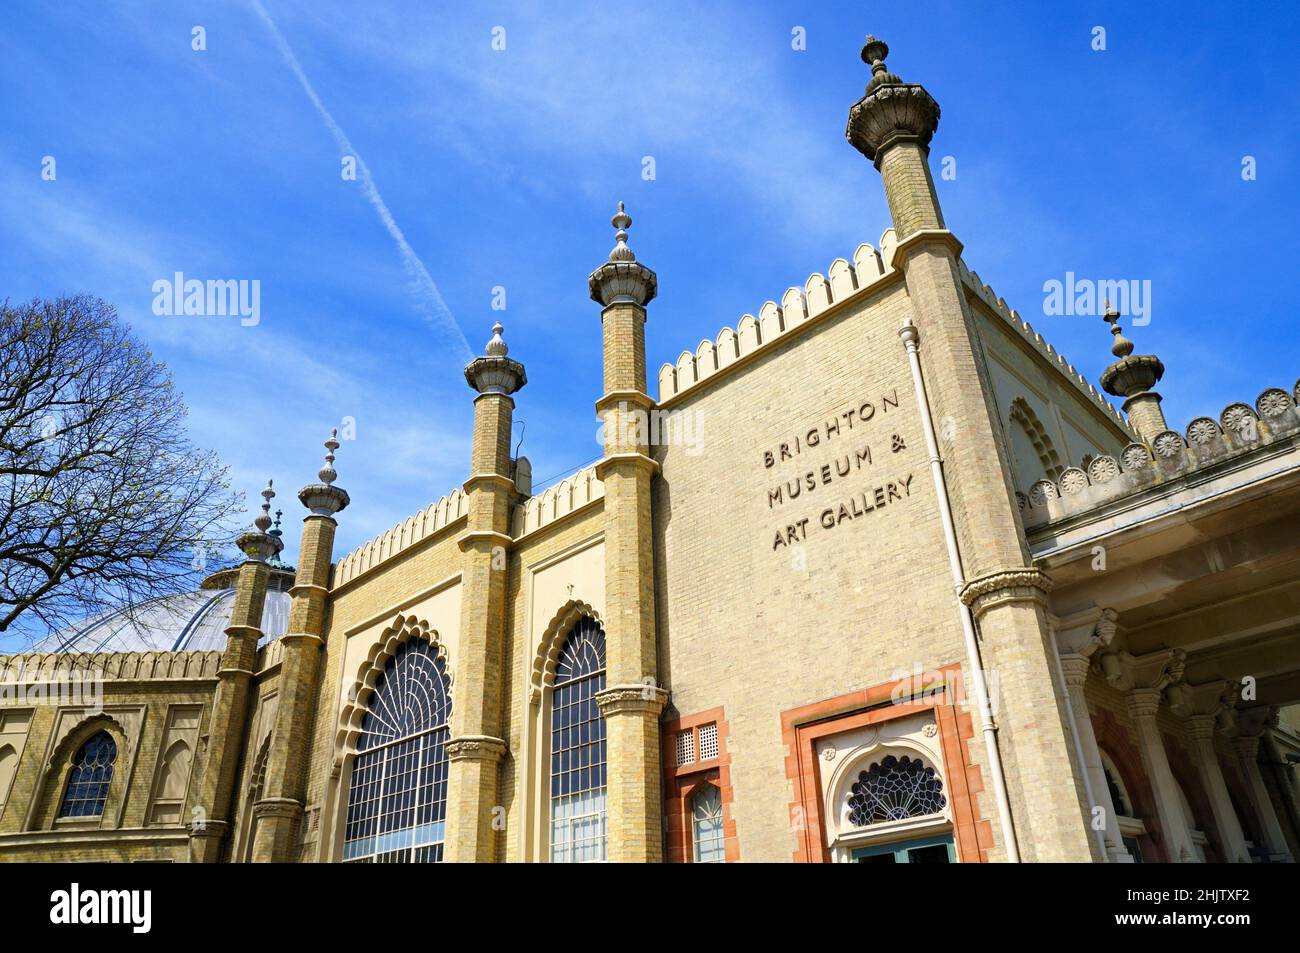 Brighton Museum and Art Gallery in the Royal Pavilion Gardens, Brighton, East Sussex, England, UK Stock Photo